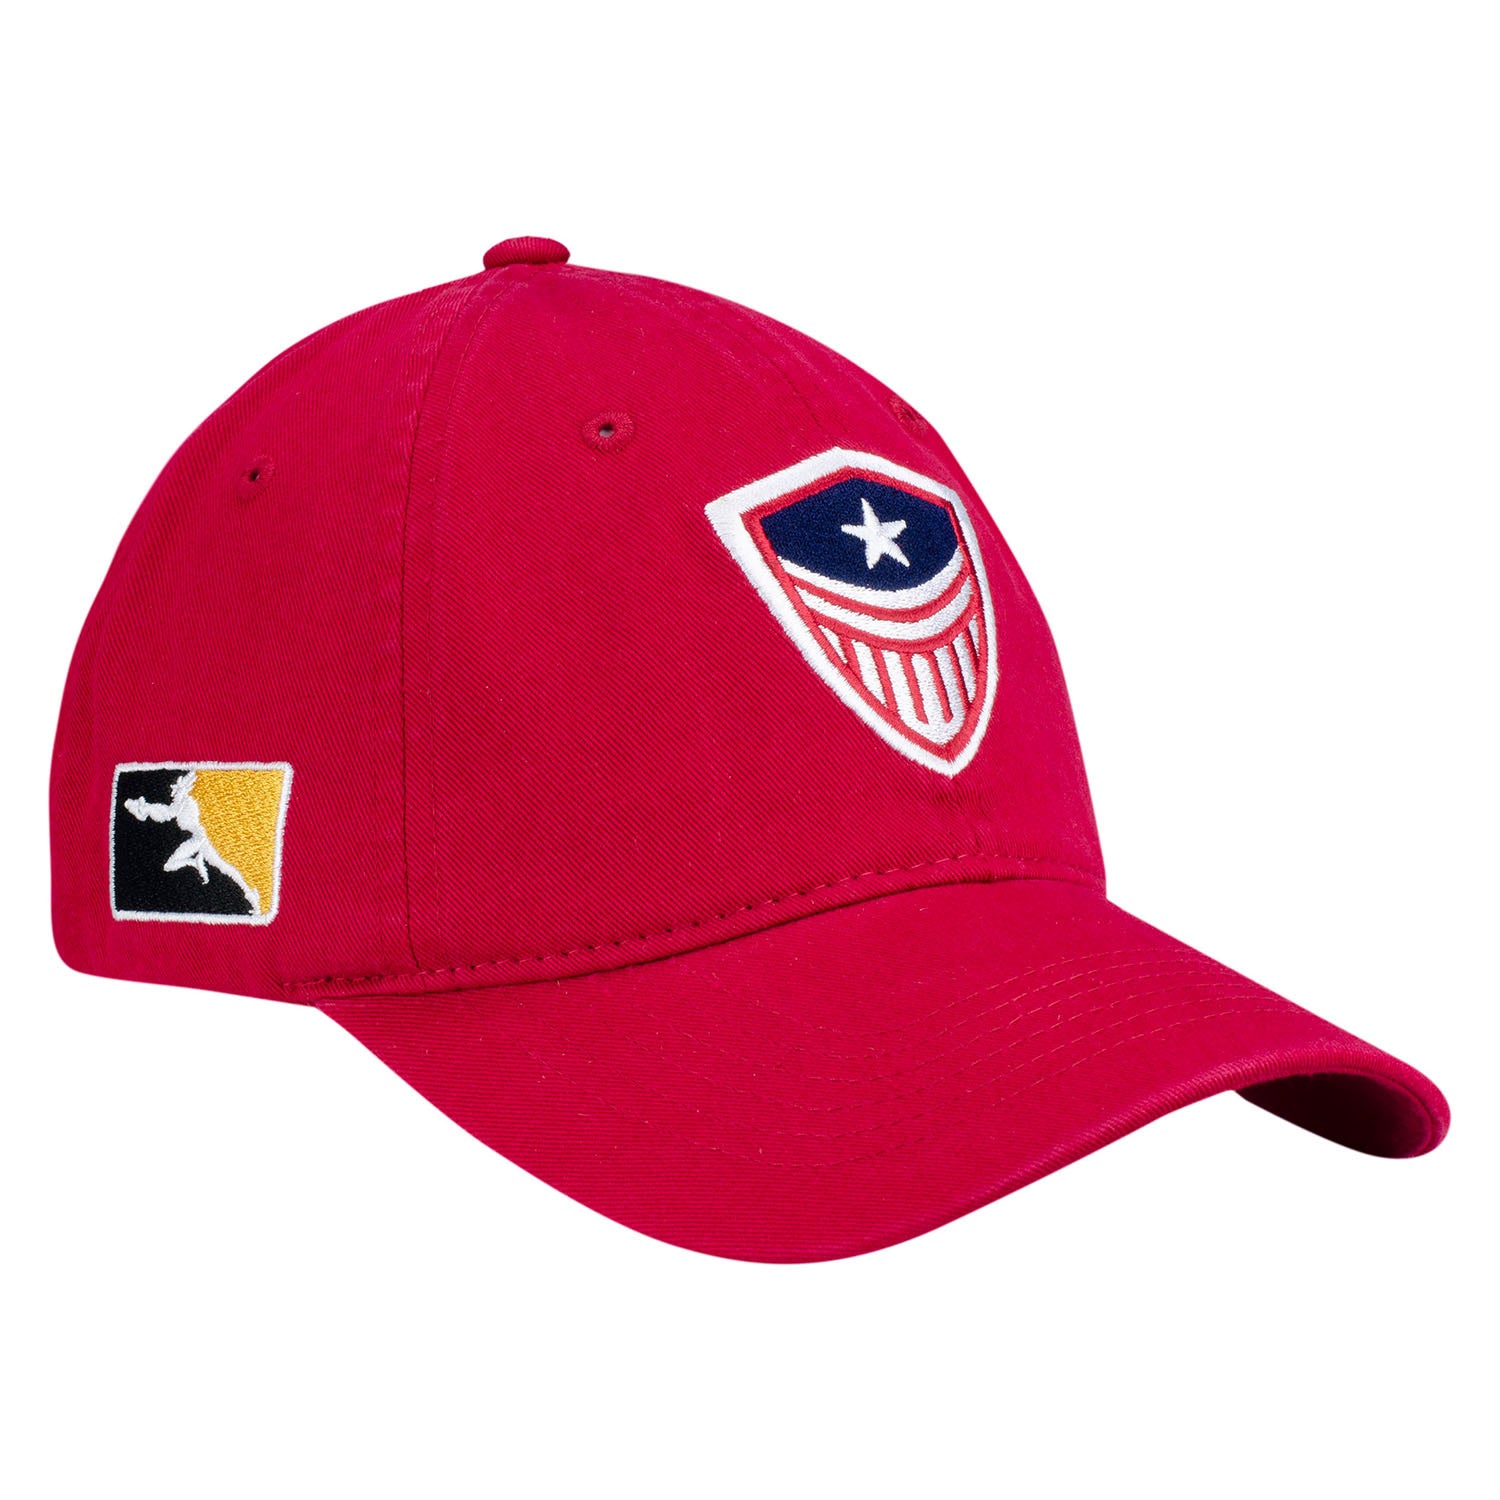 Washington Justice Red Dad Hat - Right View